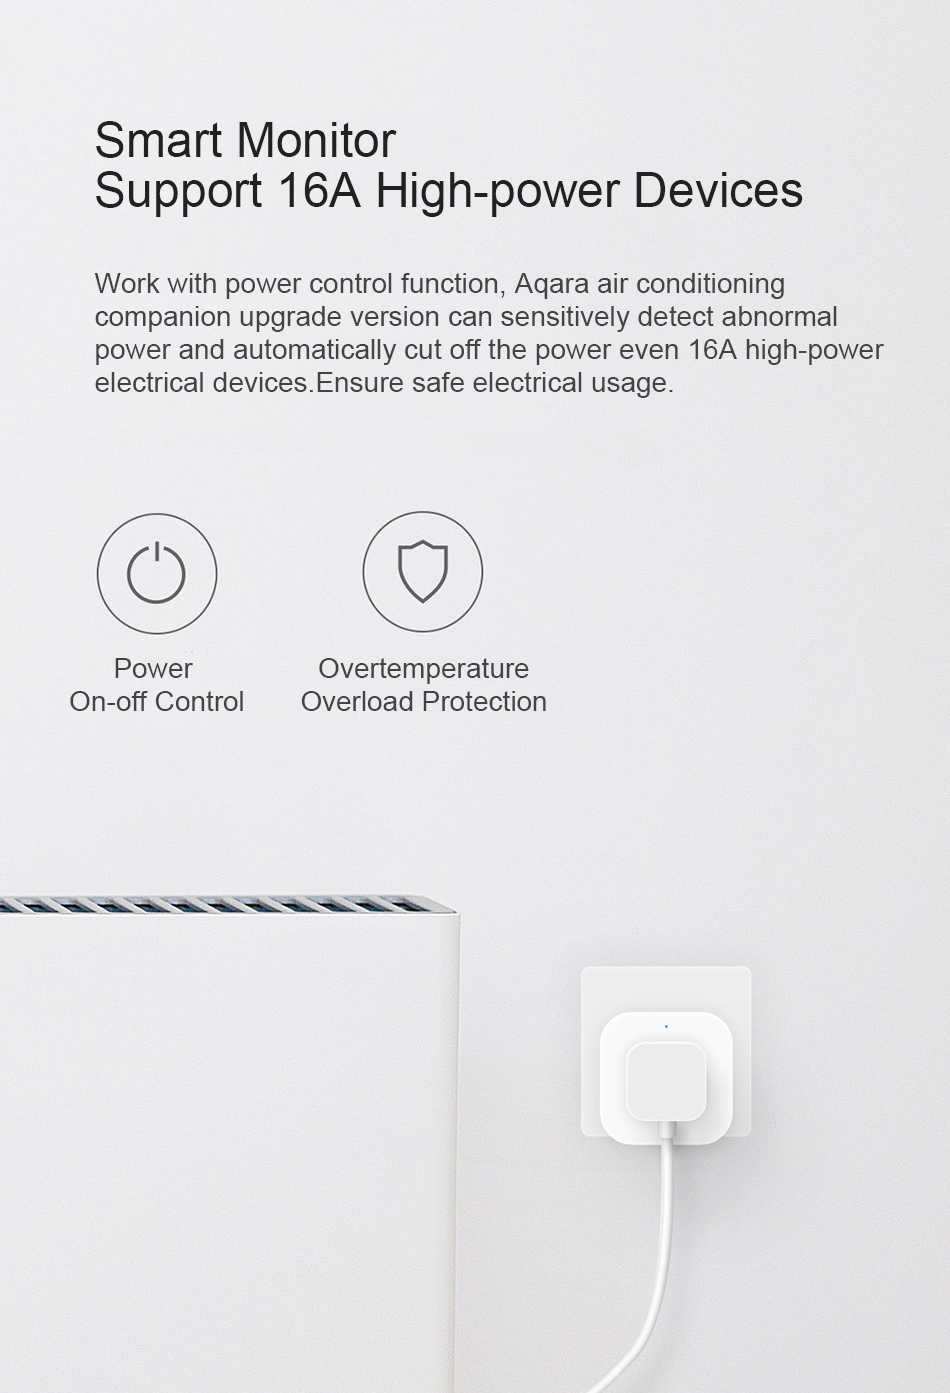 Original Xiaomi Aqara 16A Air Conditioner Companion Smart Socket with Gateway Linkage Function High-power Switch Outlet 64